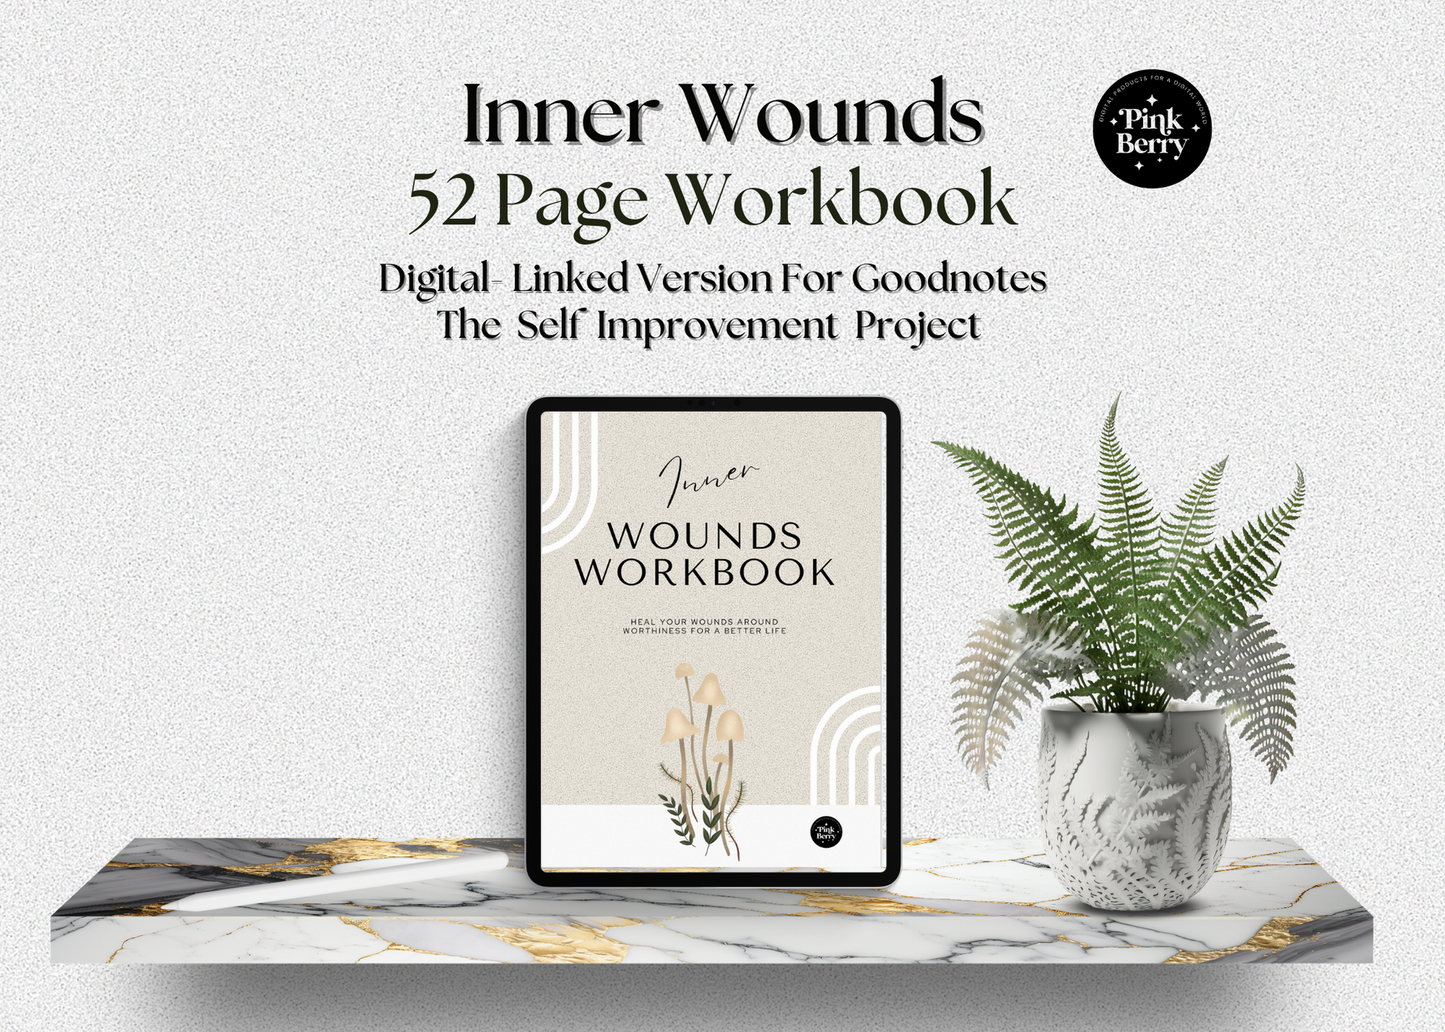 Inner Core Wounds Digital Workbook-52 Page Goodnotes Digital Workbook- 6 Steps With Writing Prompts Media 1 of 8